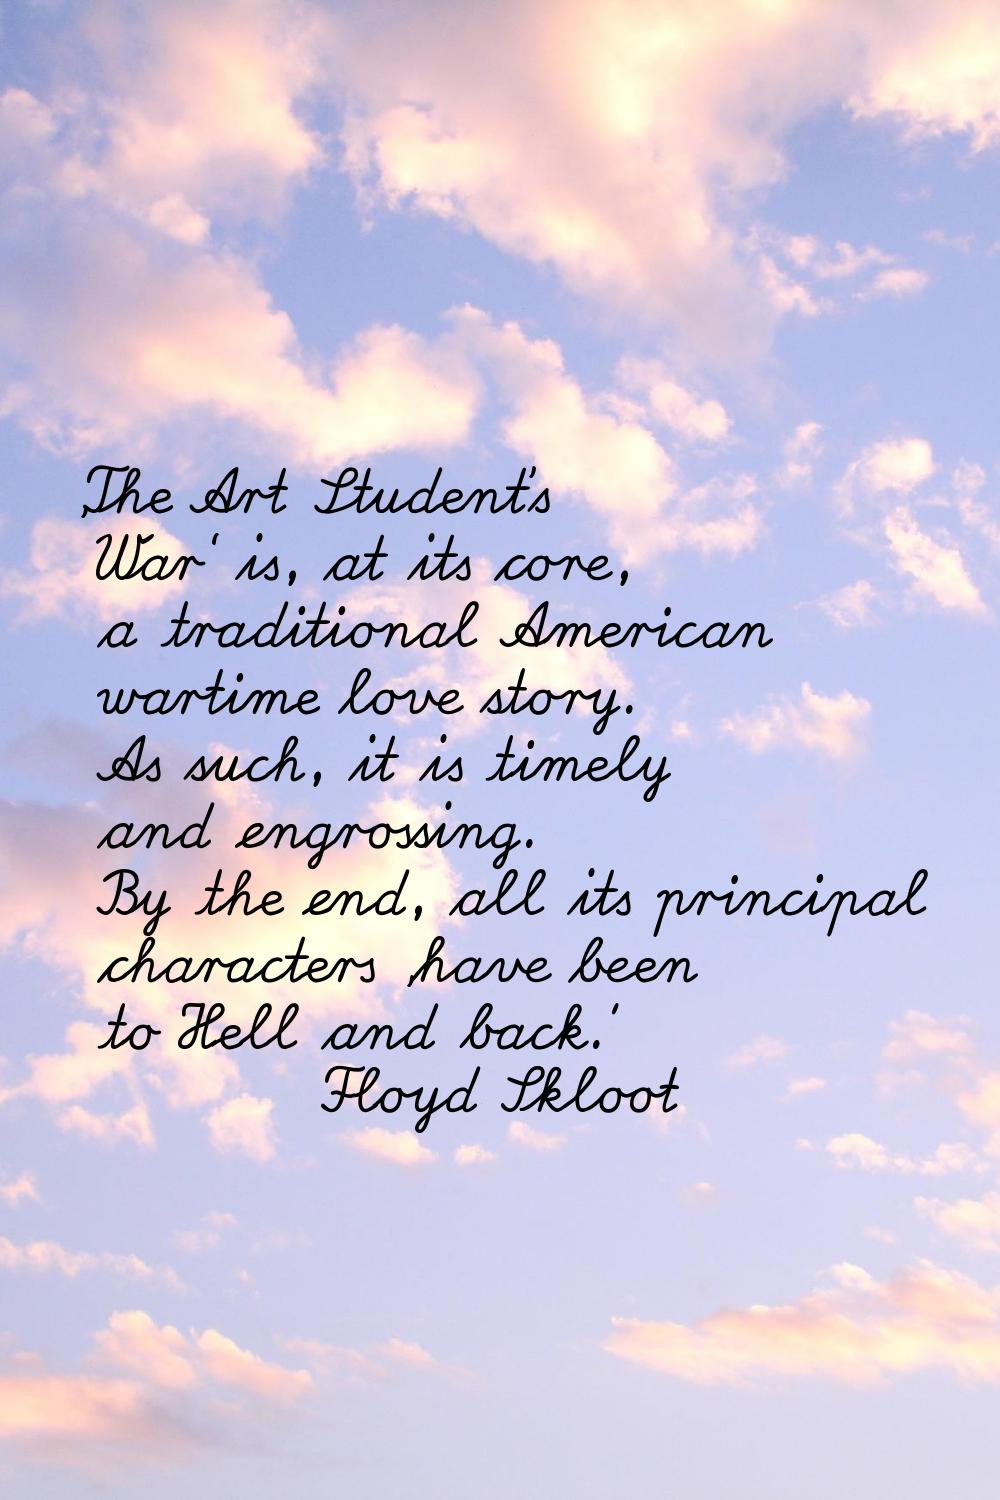 'The Art Student's War' is, at its core, a traditional American wartime love story. As such, it is 